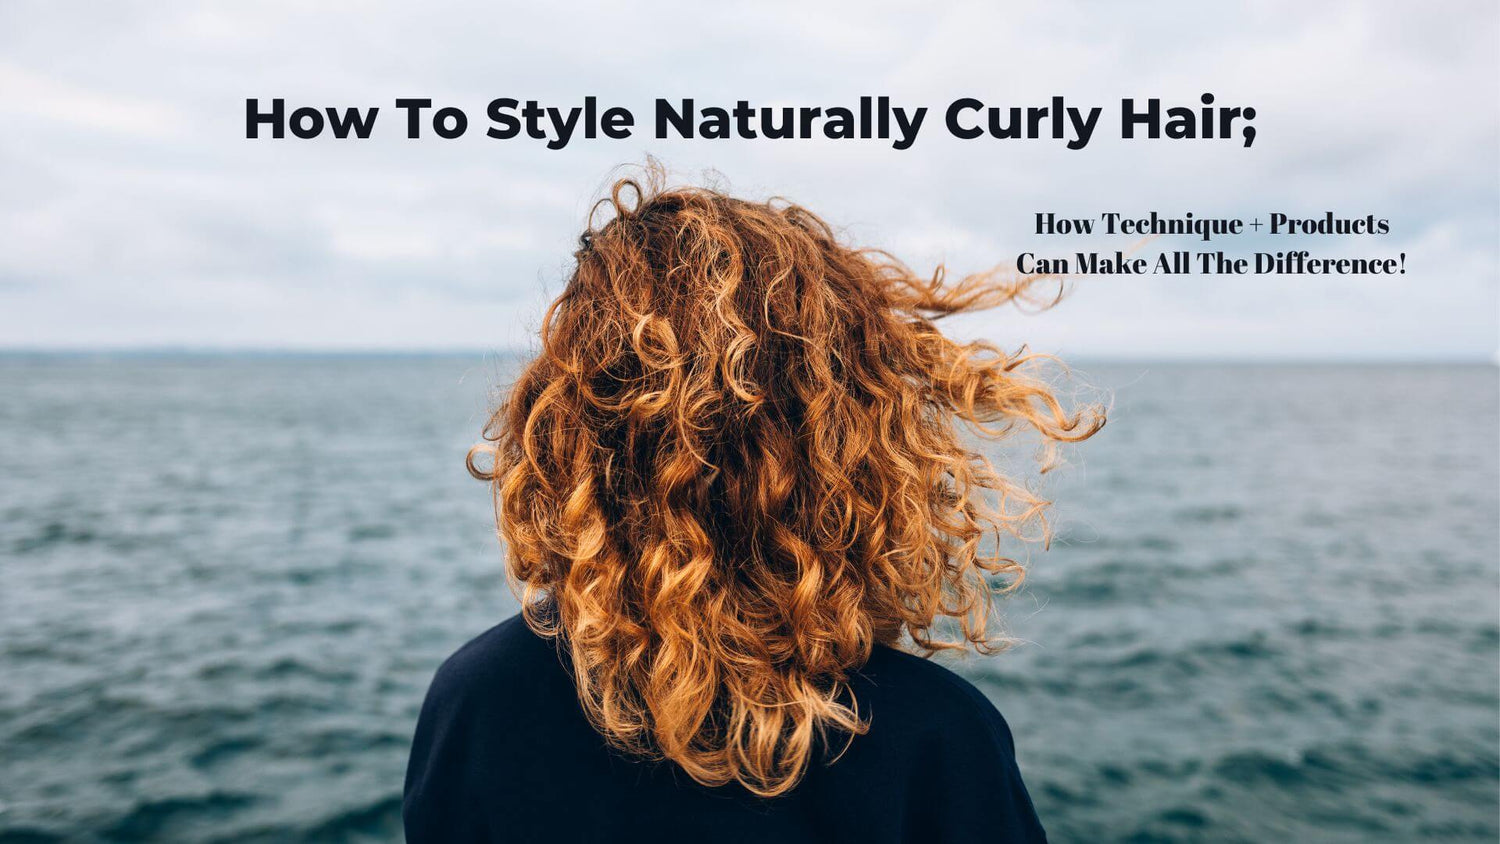 How To Style Naturally Curly Hair: How Technique + Products Can Make All the Difference!